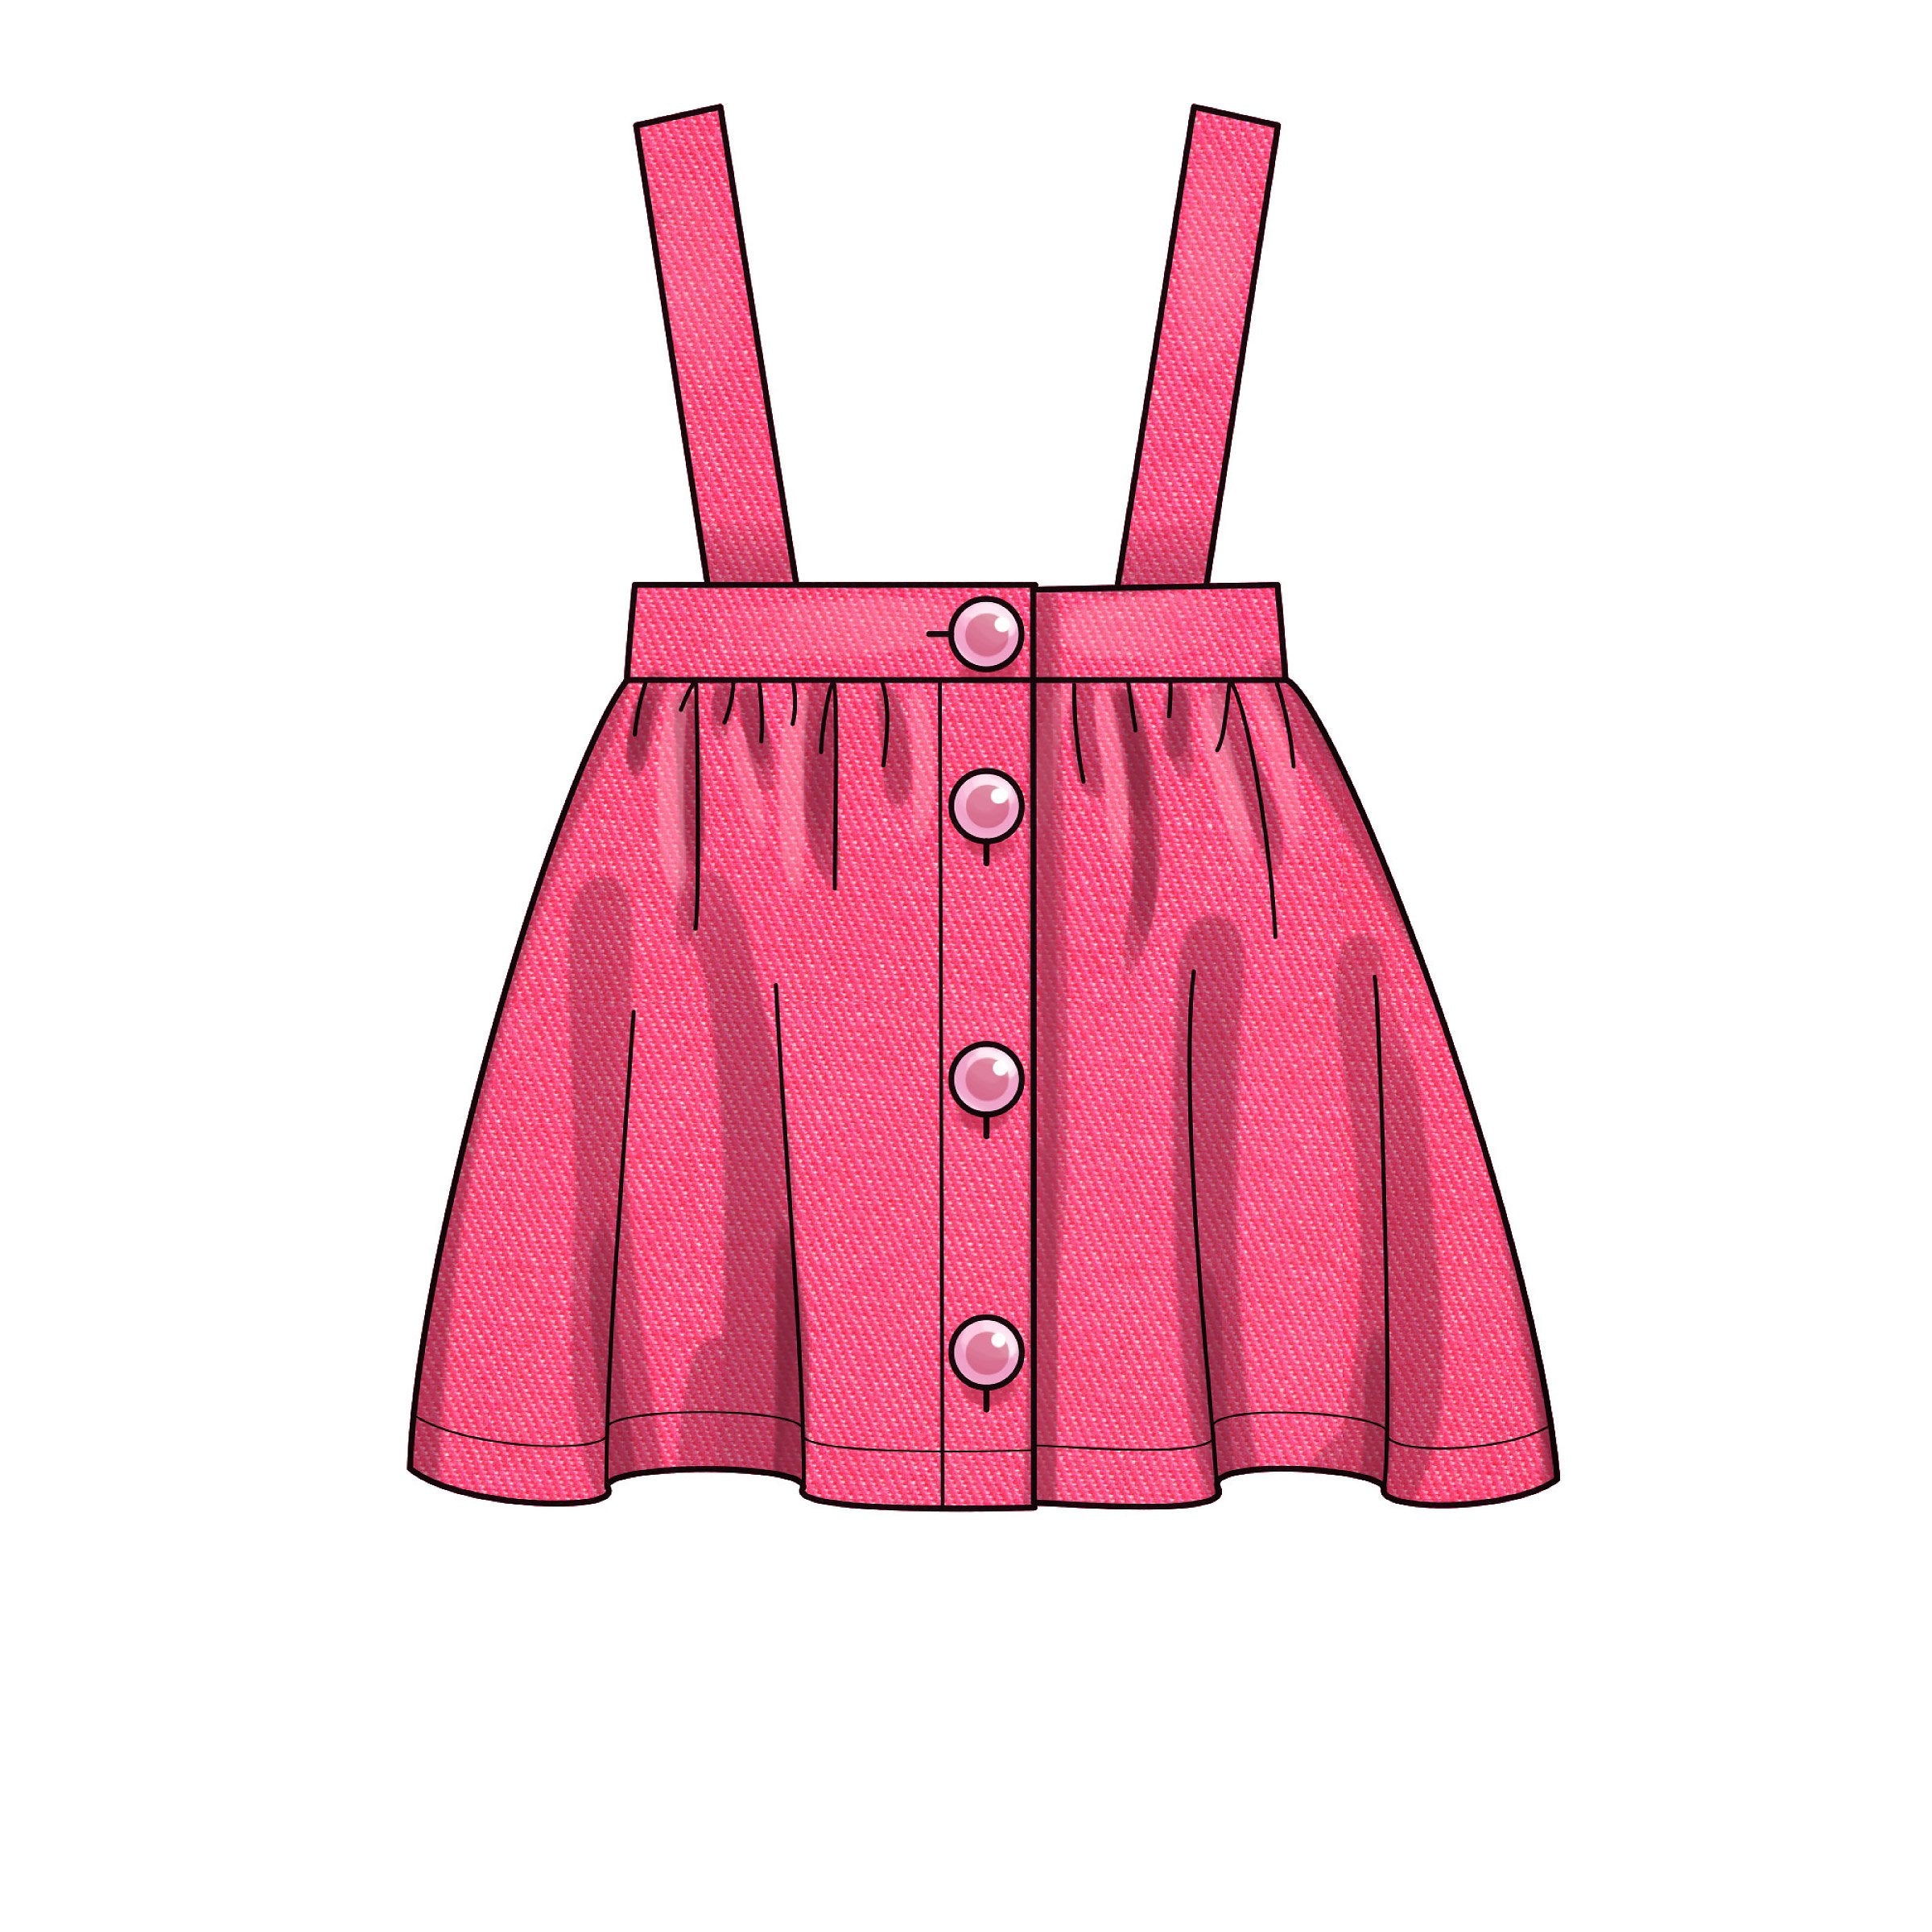 New Look Sewing Pattern 6664 Toddlers' and Children's Skirts from Jaycotts Sewing Supplies